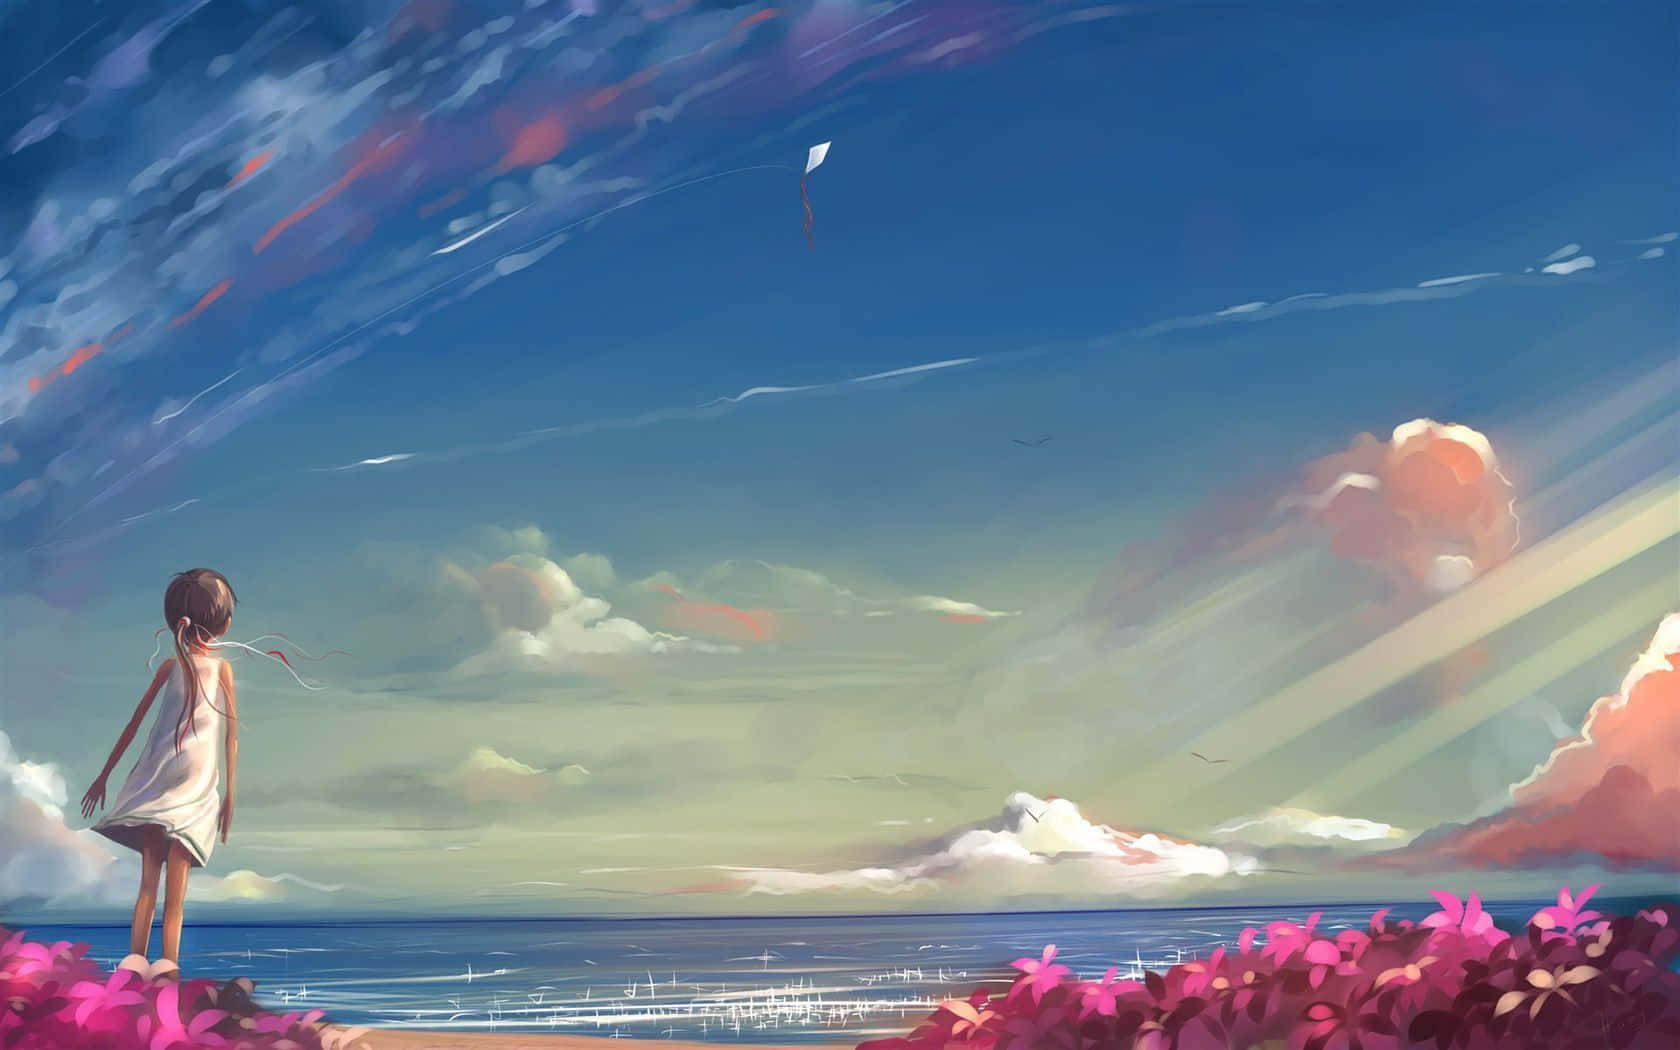 A Magical Dreamscape with Colorful Planets and Stars